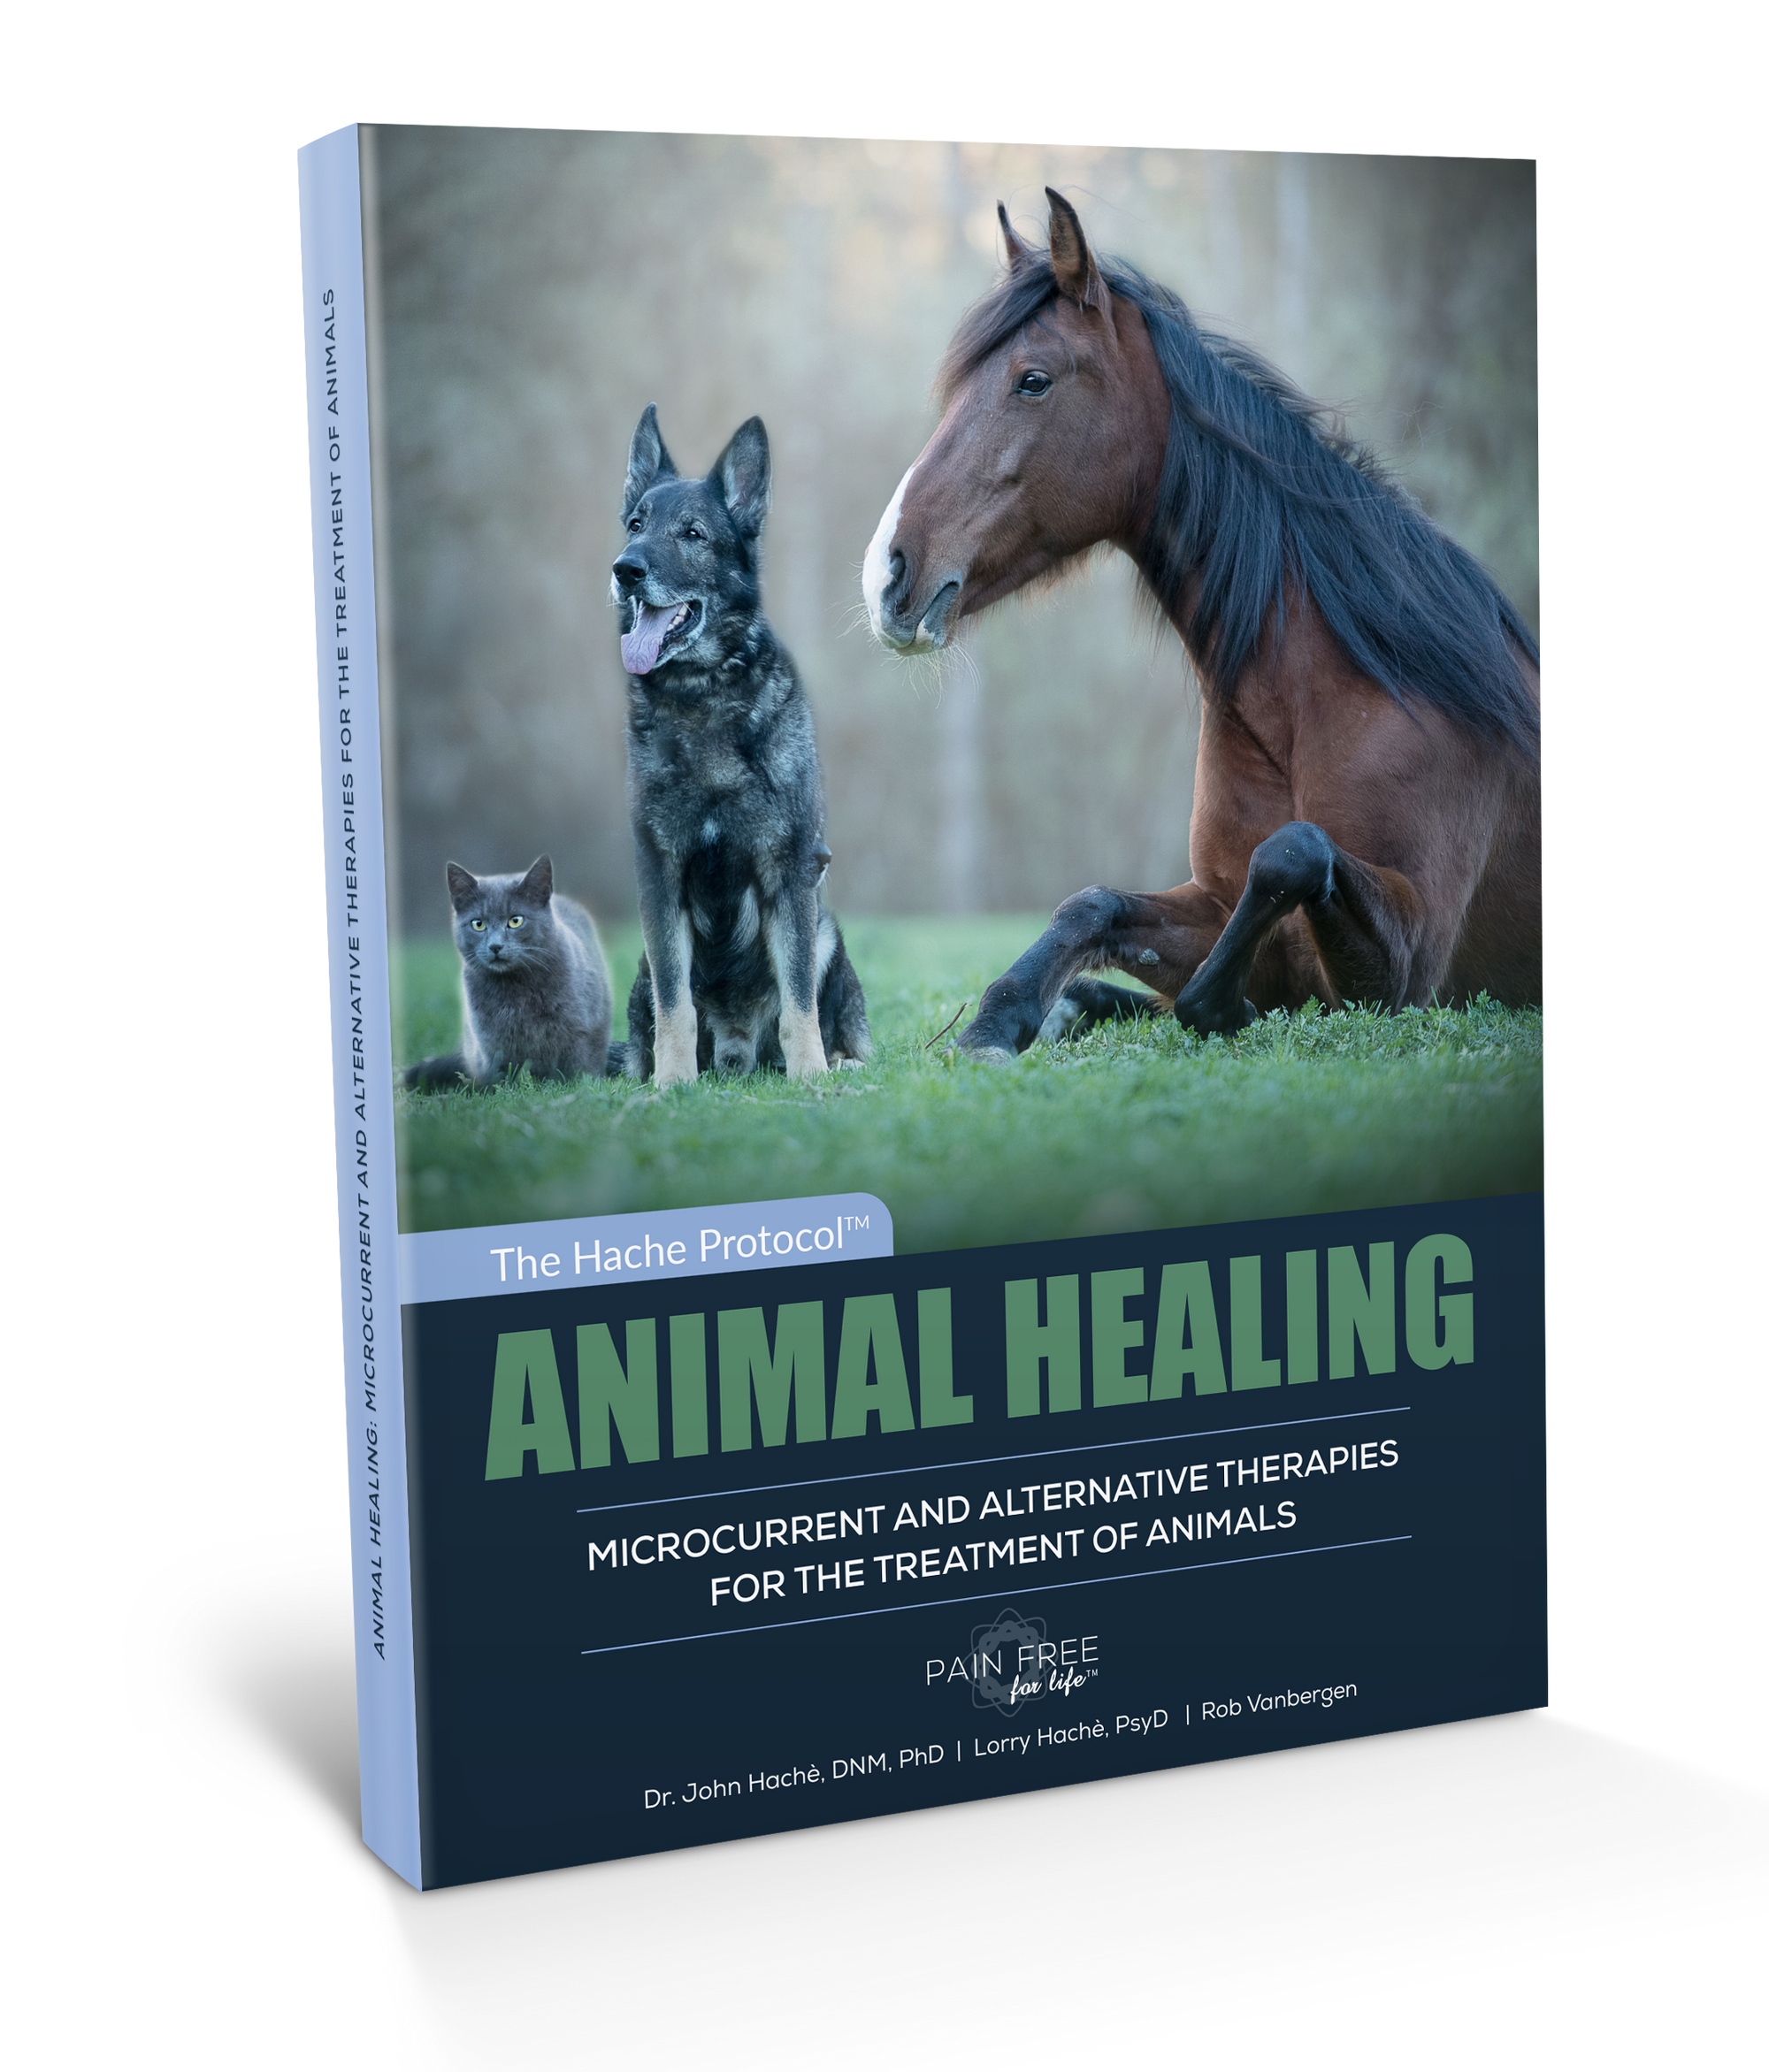 Animal Healing: Microcurrent and Alternative Therapies for the Treatment of Animals - The Sana Shop